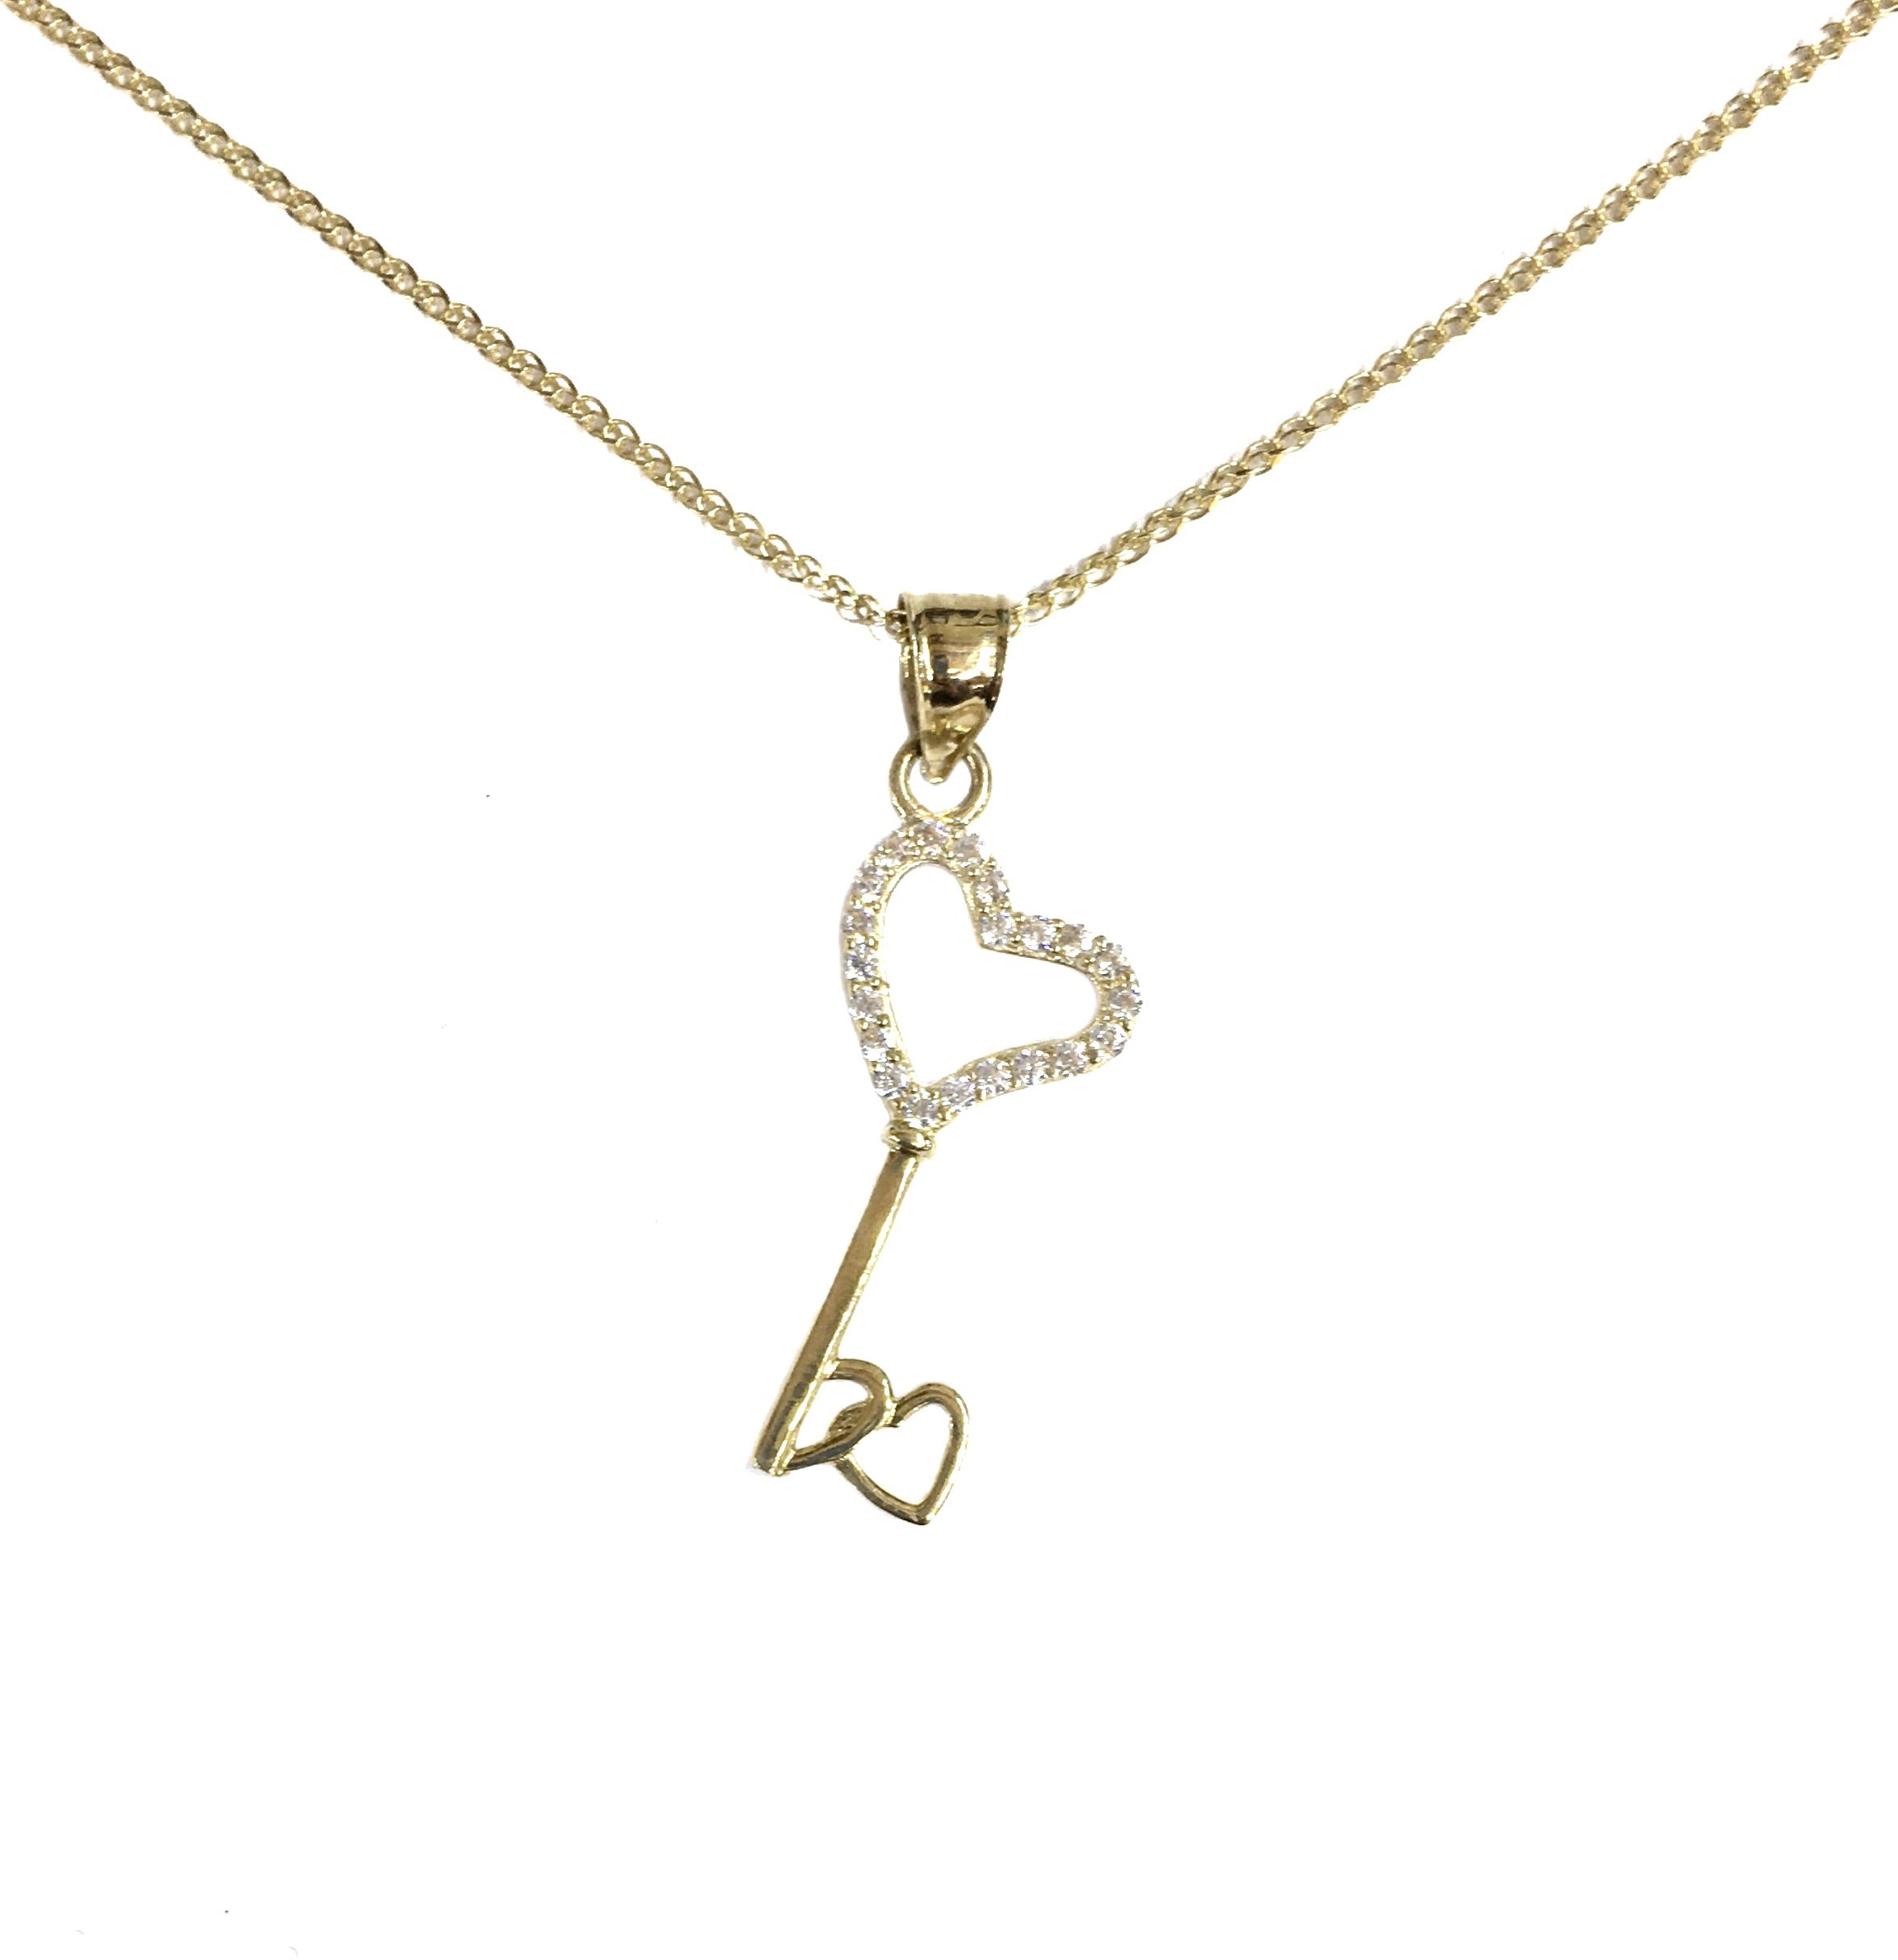 14K YELLOW GOLD PAVE HEART KEY NECKLACE -CUBIC ZIRCONIA